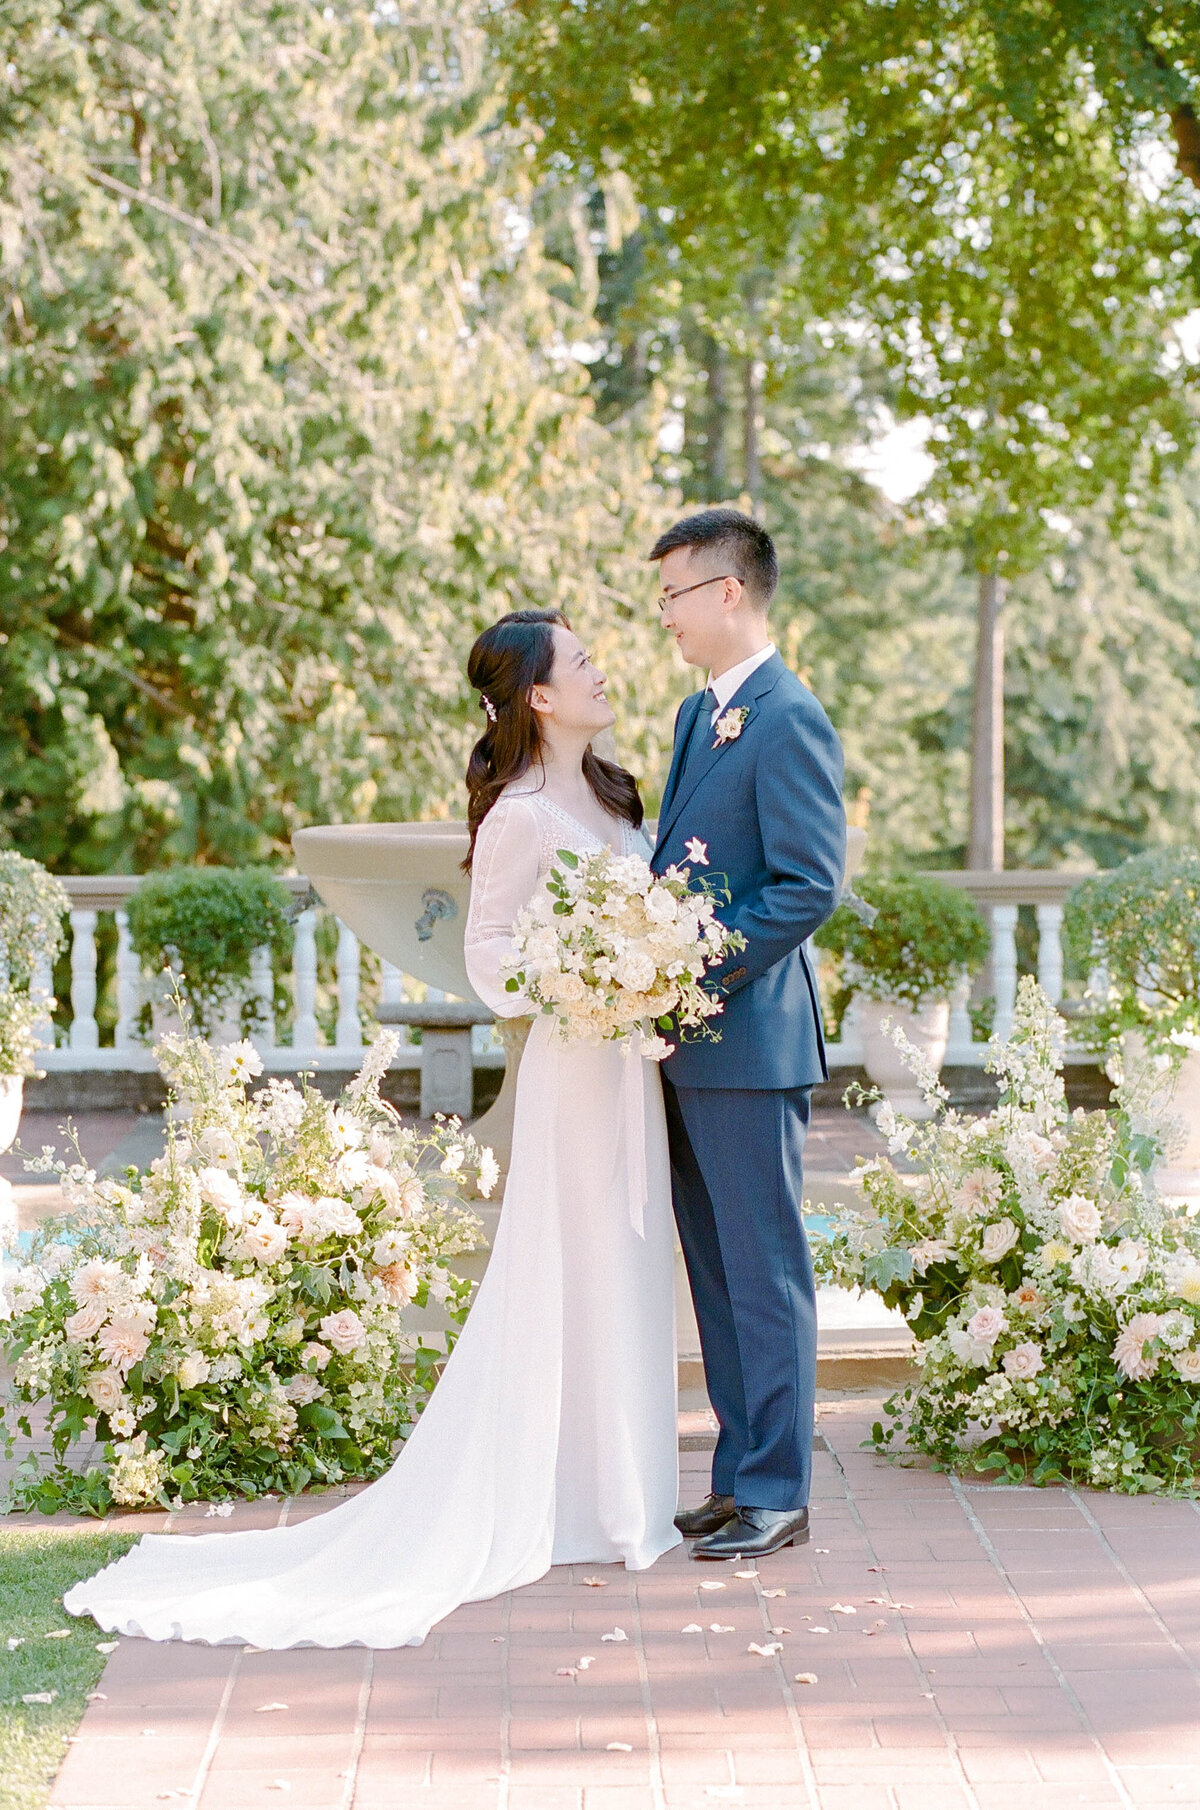 5 - Qi & Fengtao - Lairmont Manor - Kerry Jeanne Photography (54)